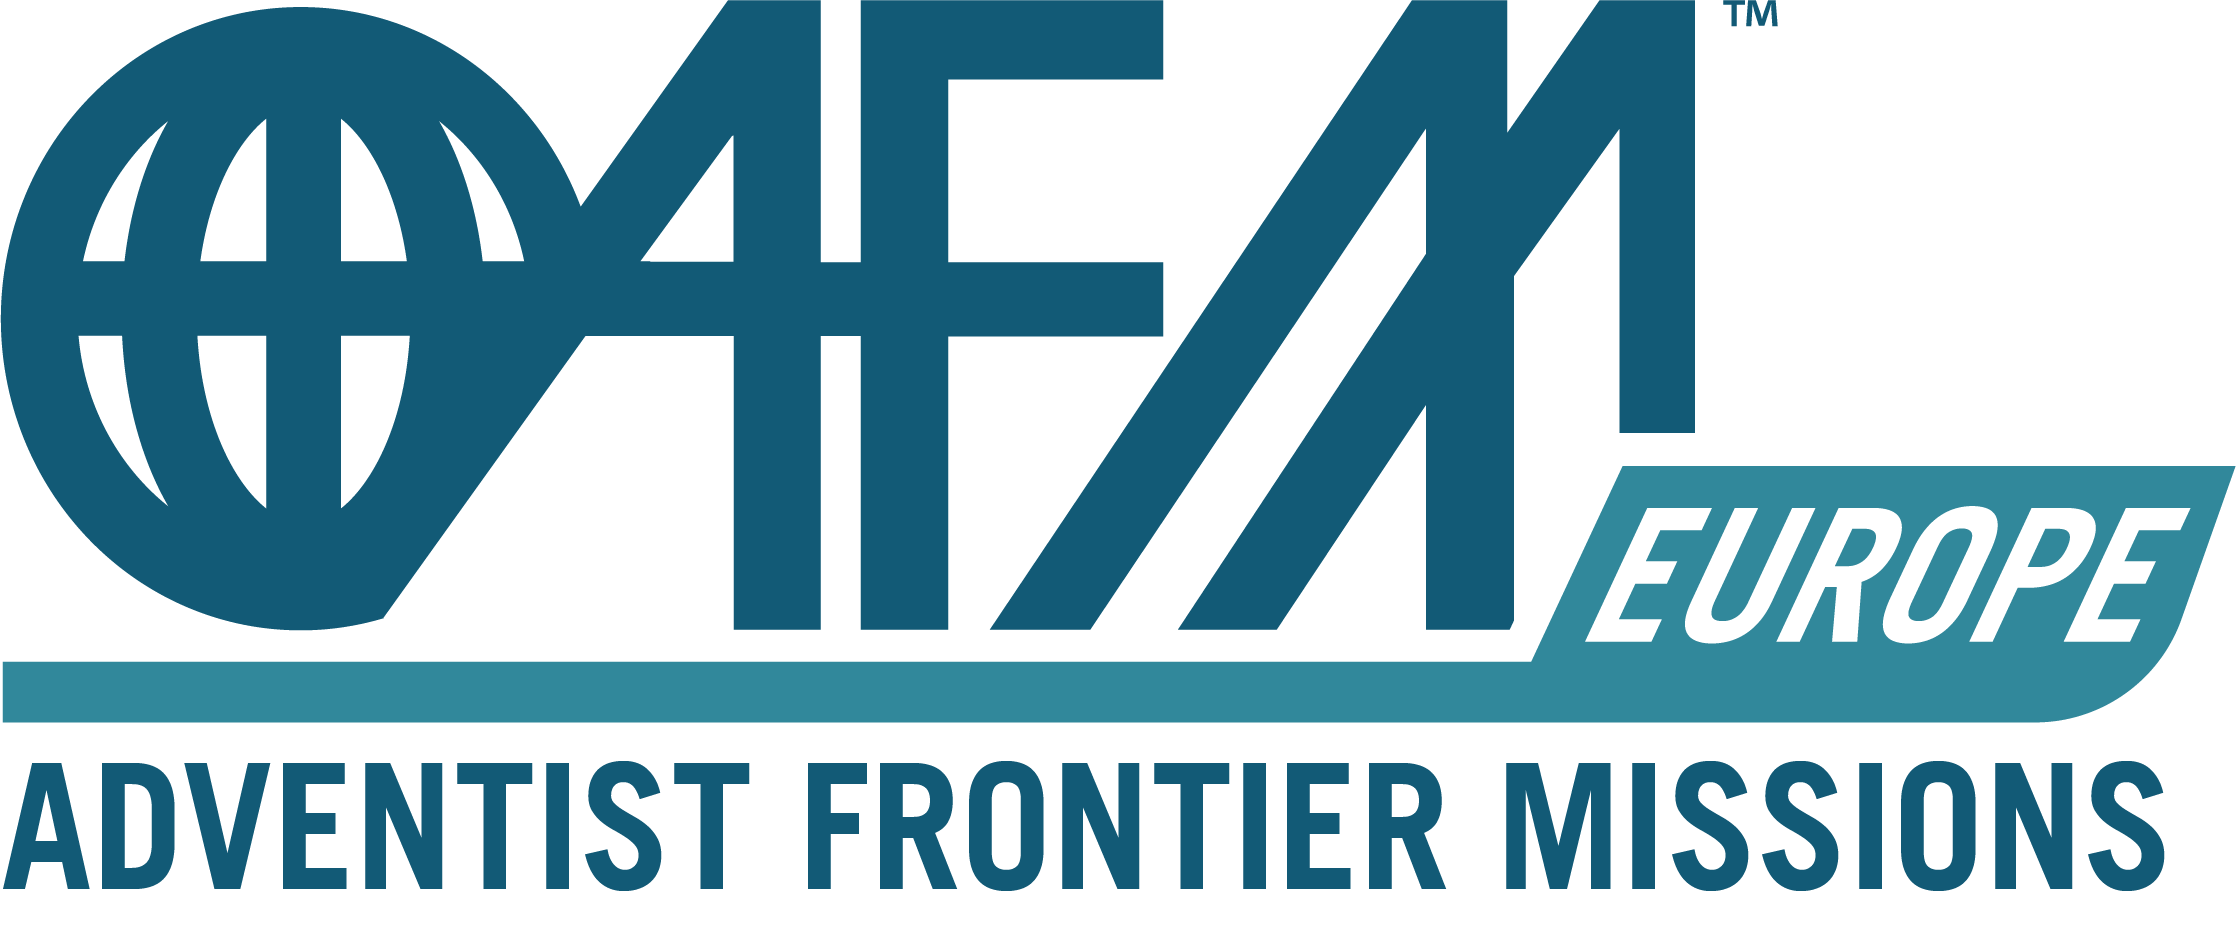 Adventist Frontier Missions Europe